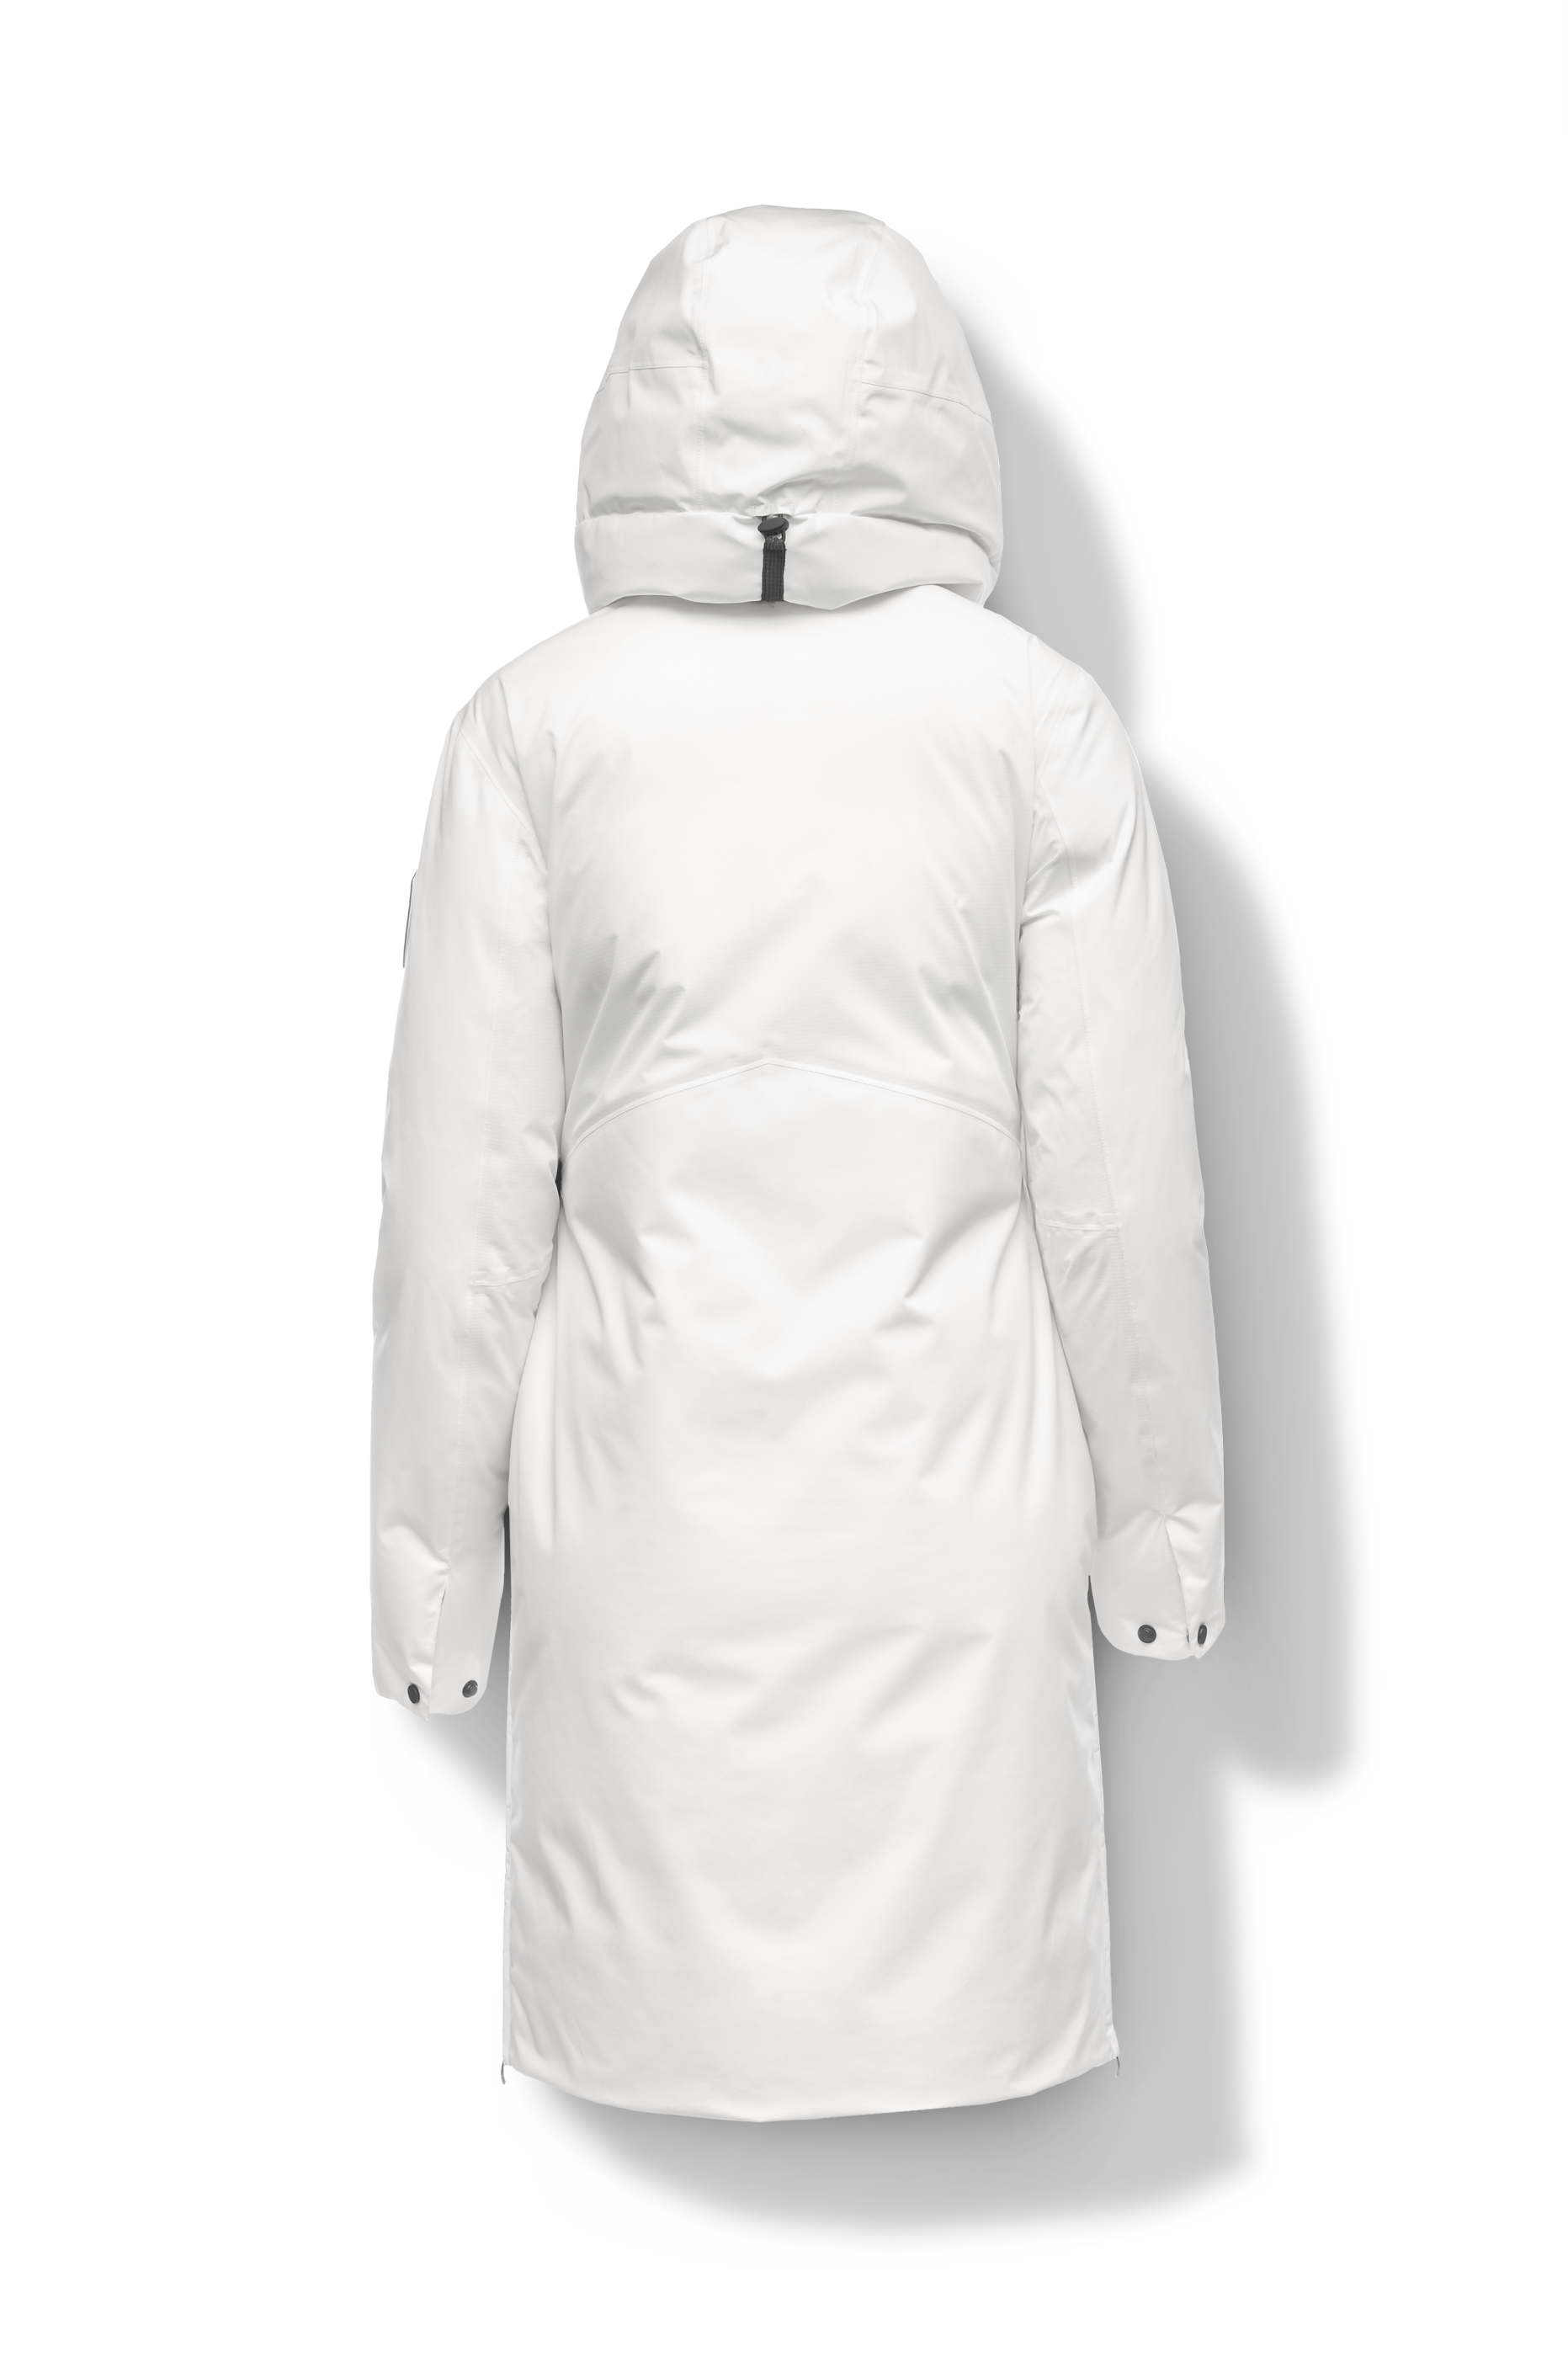 Inara Women's Performance Parka in knee length, premium 3-ply micro denier and stretch ripstop fabrication with DWR coating, Premium Canadian White Duck Down insulation, non-removable down-filled hood, centre front two-way zipper, large vertical zipper pockets along waist, zipper vents along bottom side hem, in Chalk